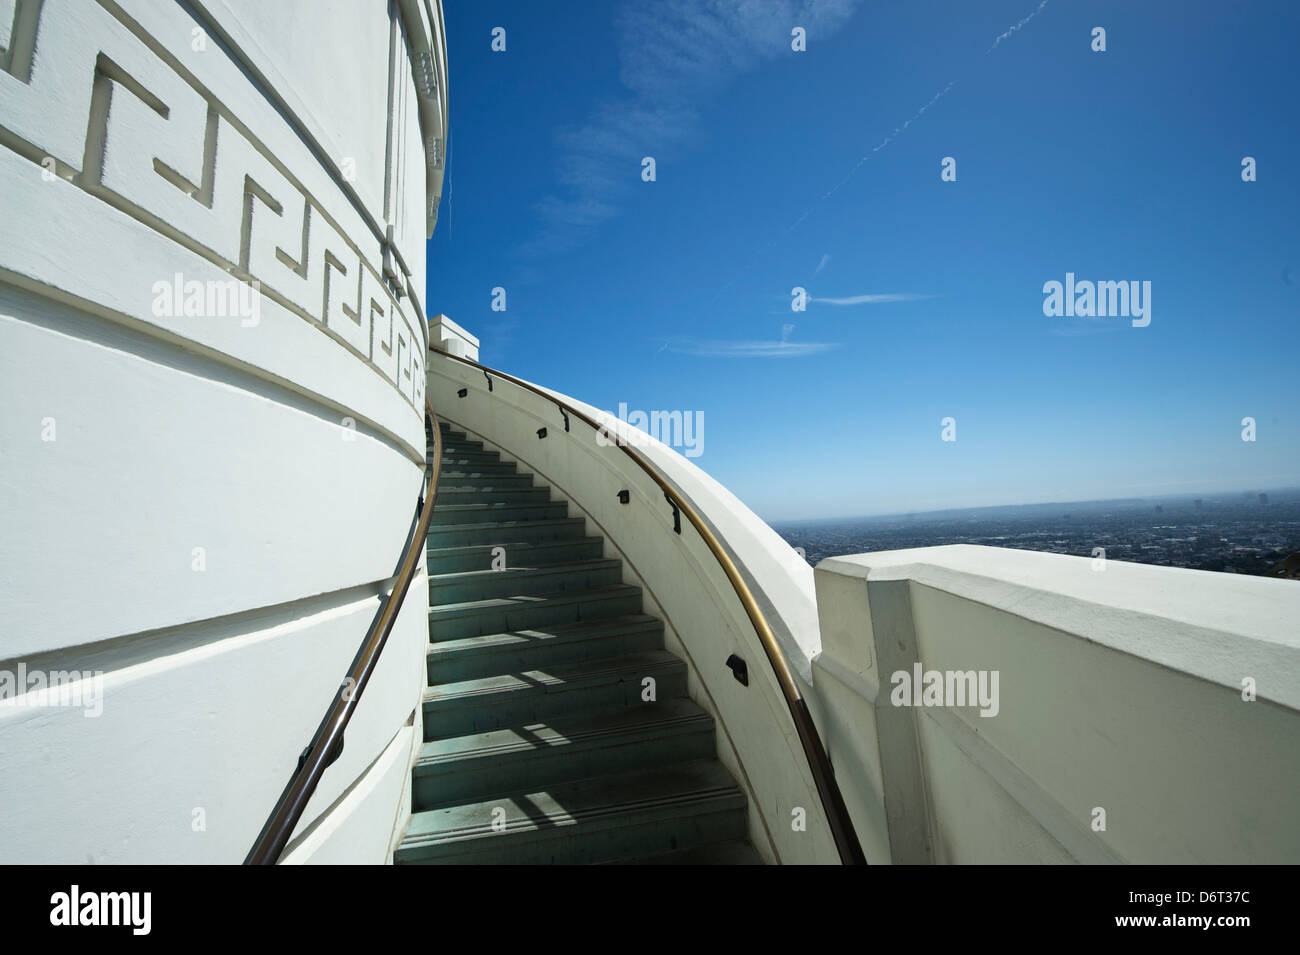 Los Angeles, California, April 11, 2013: a view of Griffith Observatory. A wide-angle, editorial, image. Stock Photo